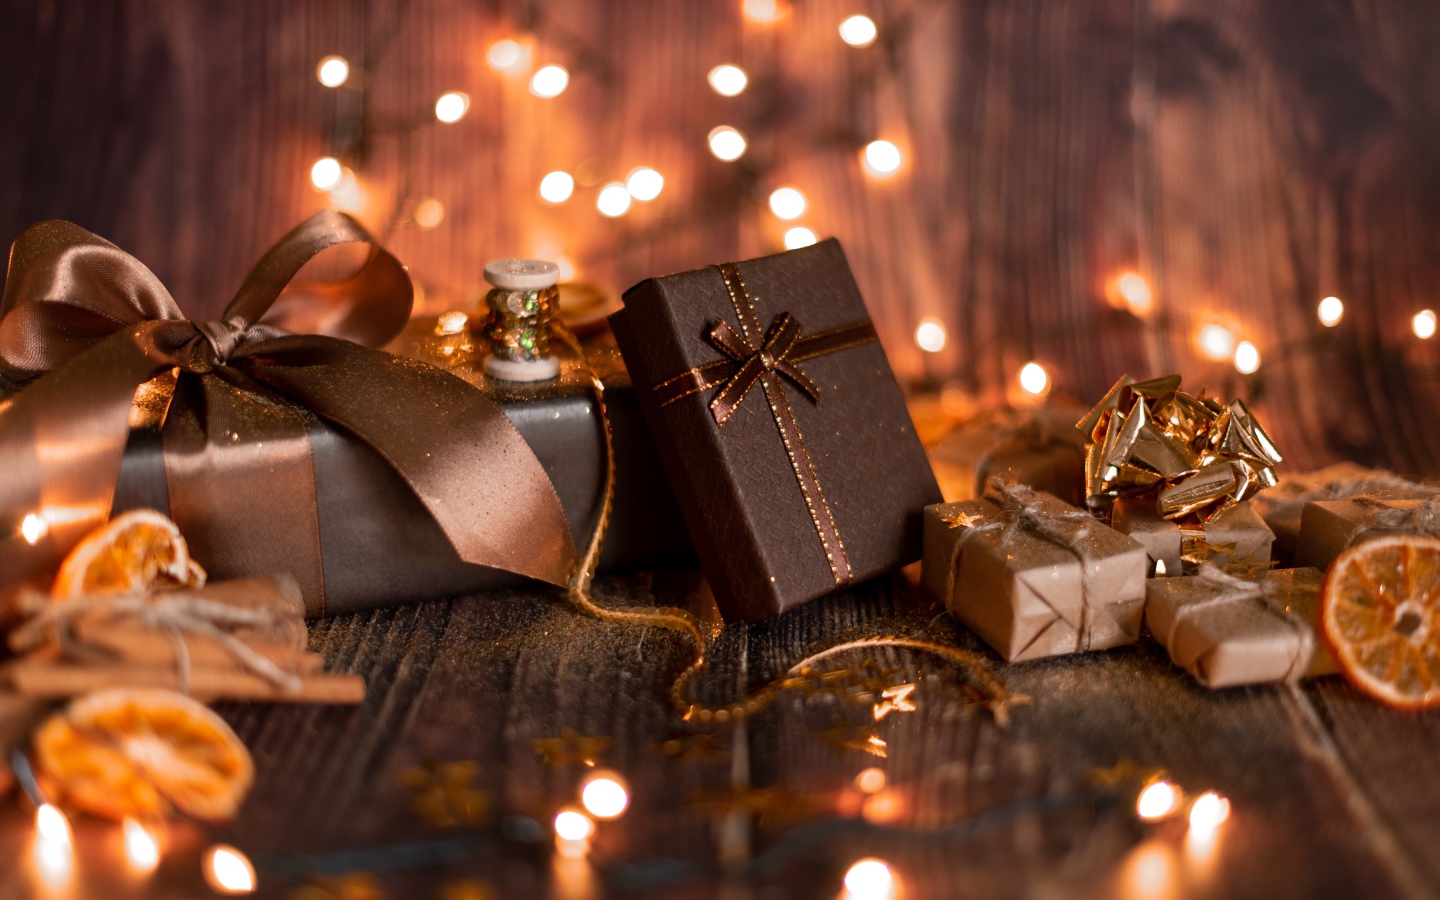 A lot of gifts on a wooden background with a garland